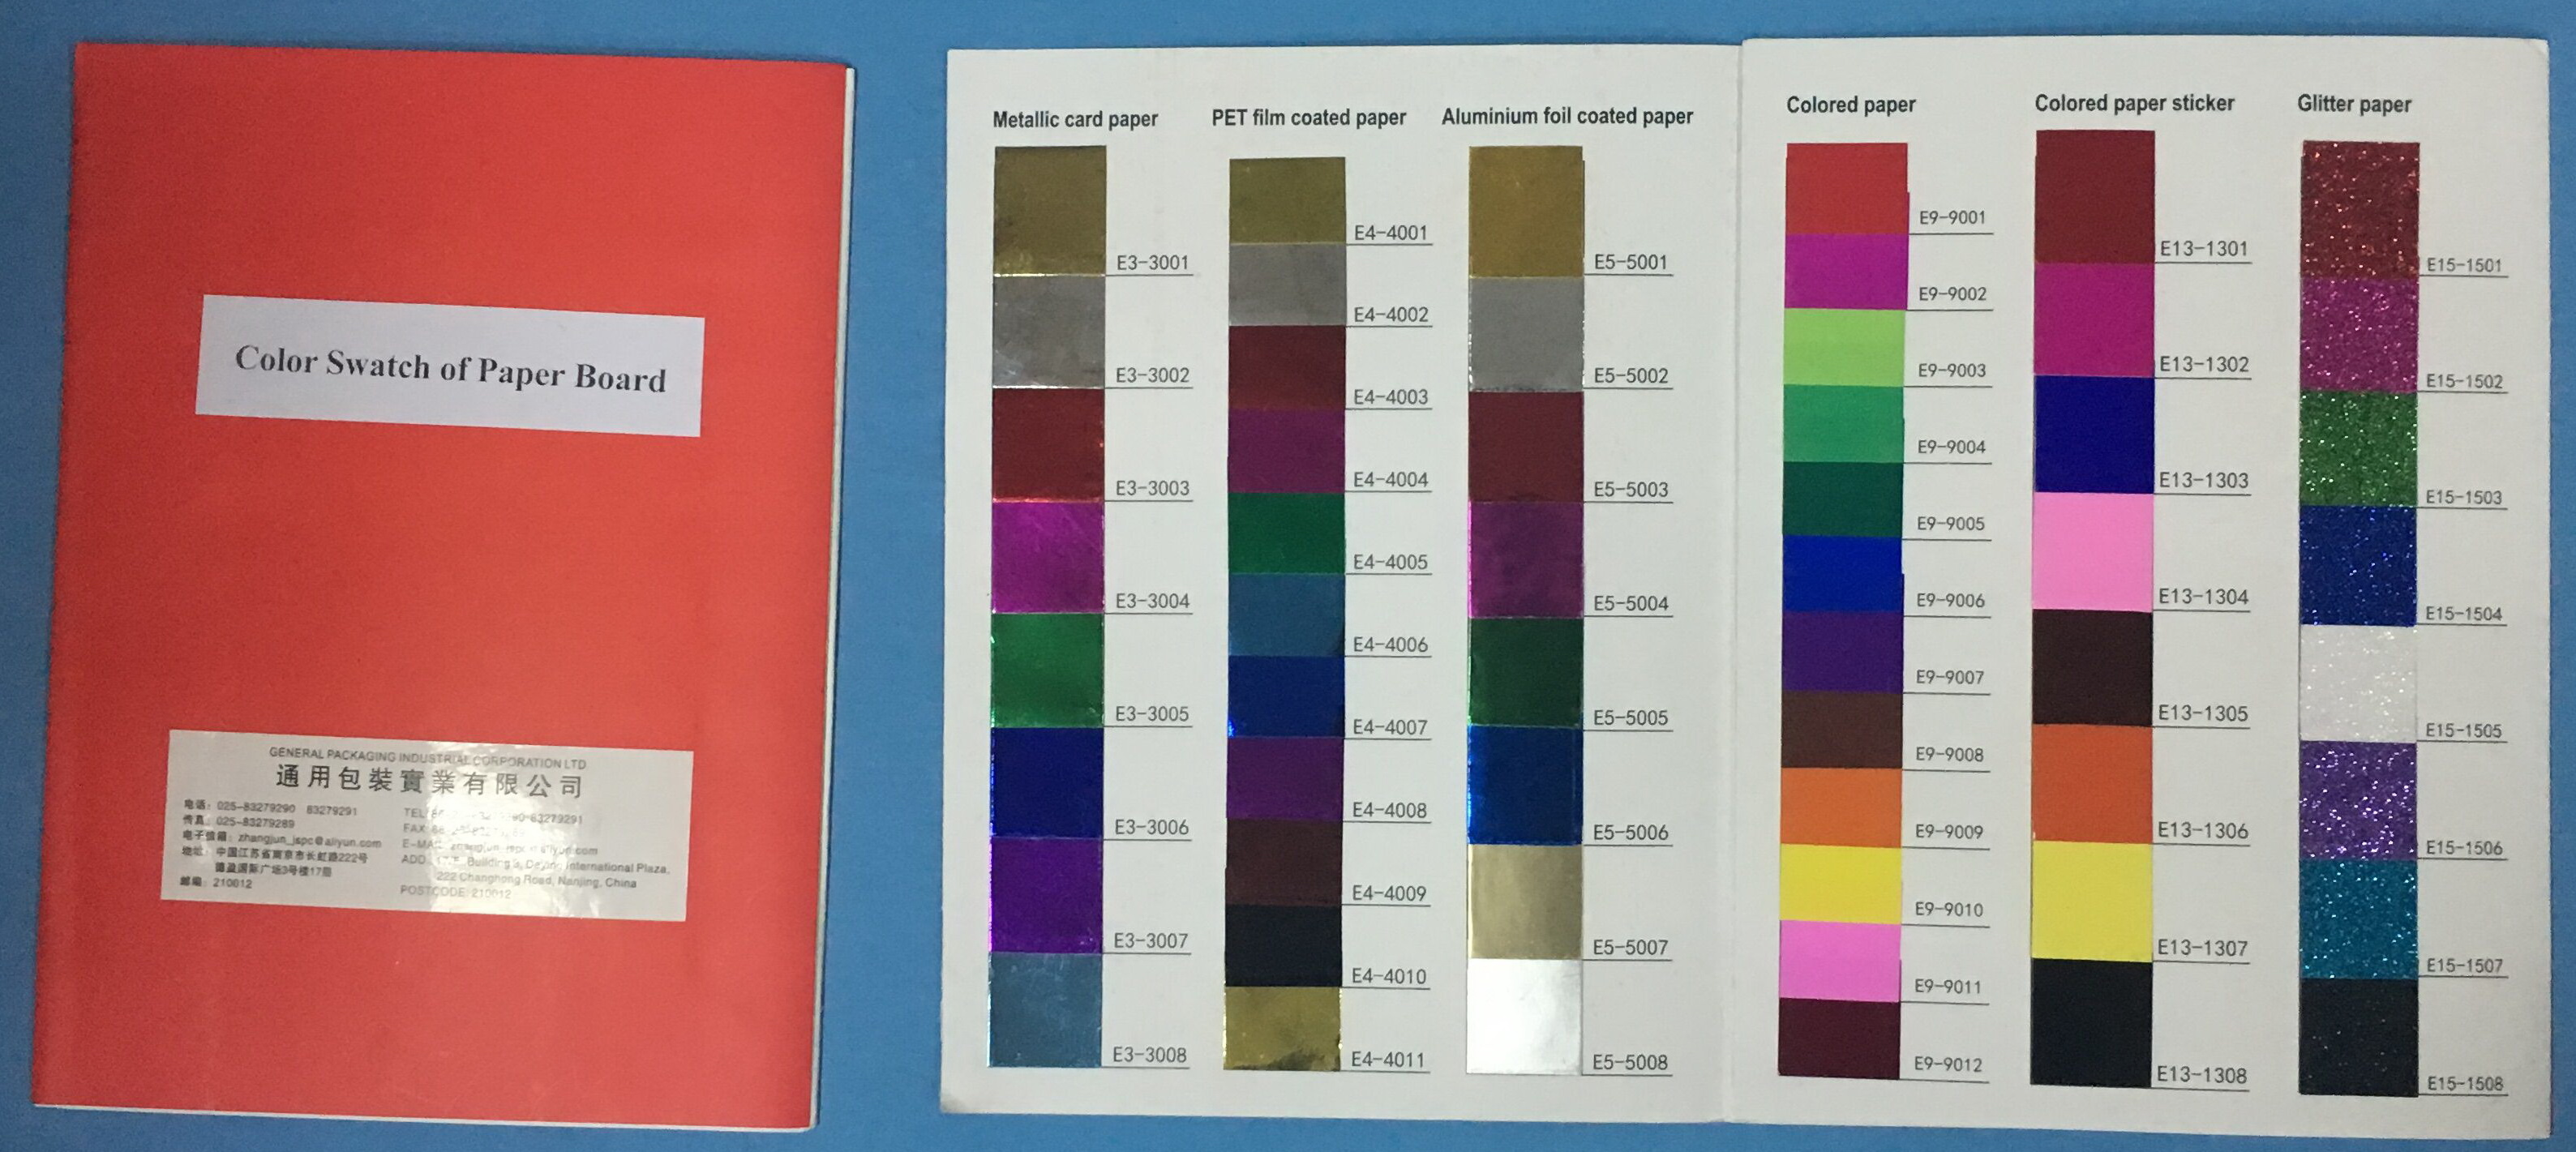 Color Swatch of Paper Board